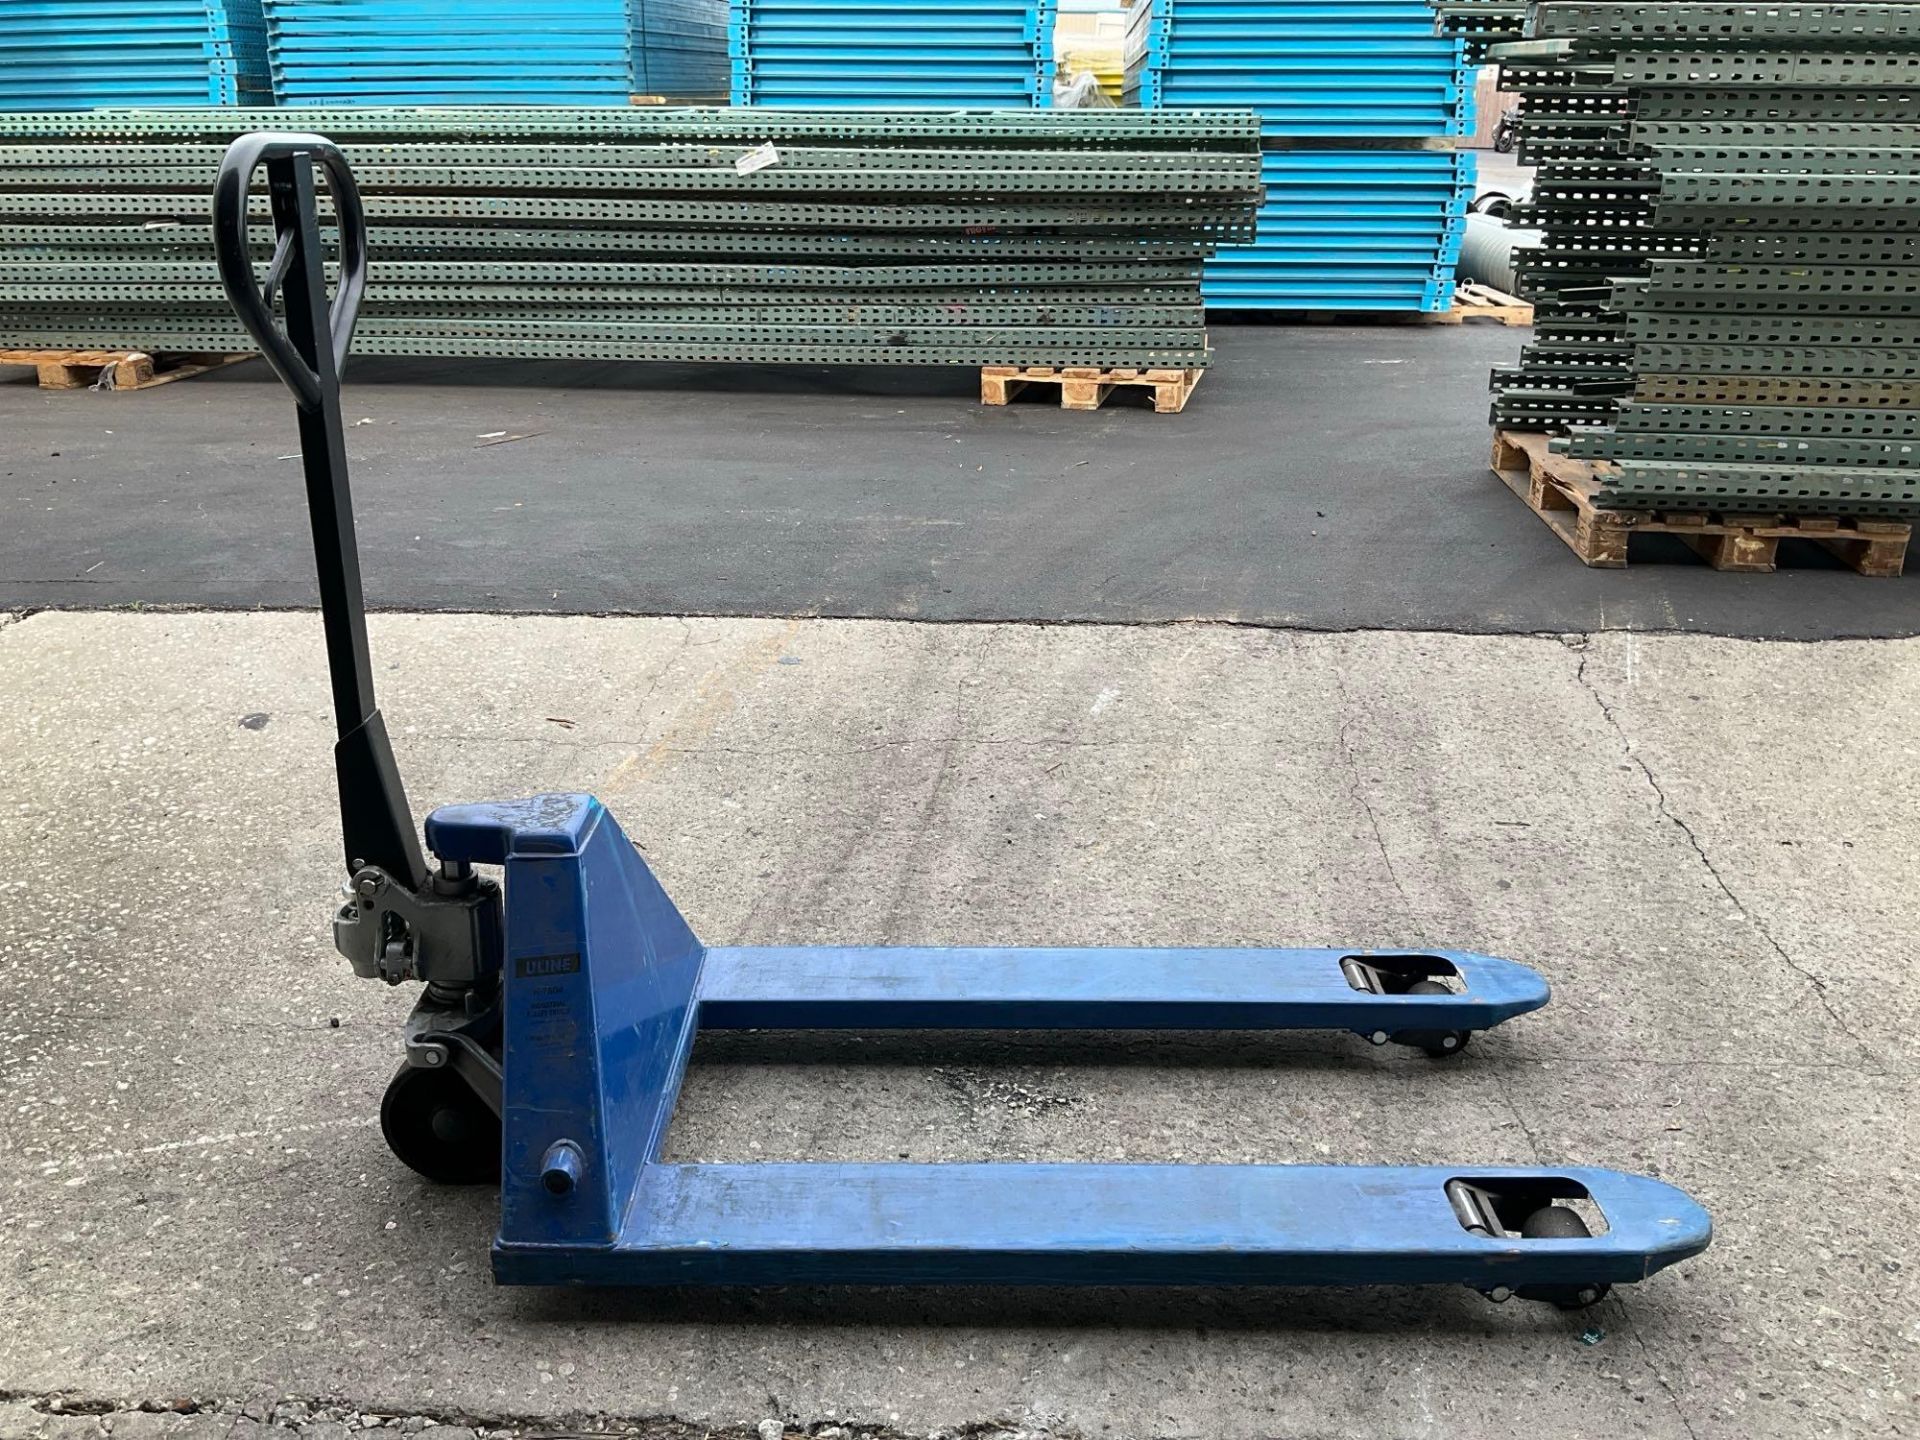 ULINE H7504 HYDRAULIC PALLET JACK, APPROX MAX CAPACITY 5500LBS - Image 2 of 10